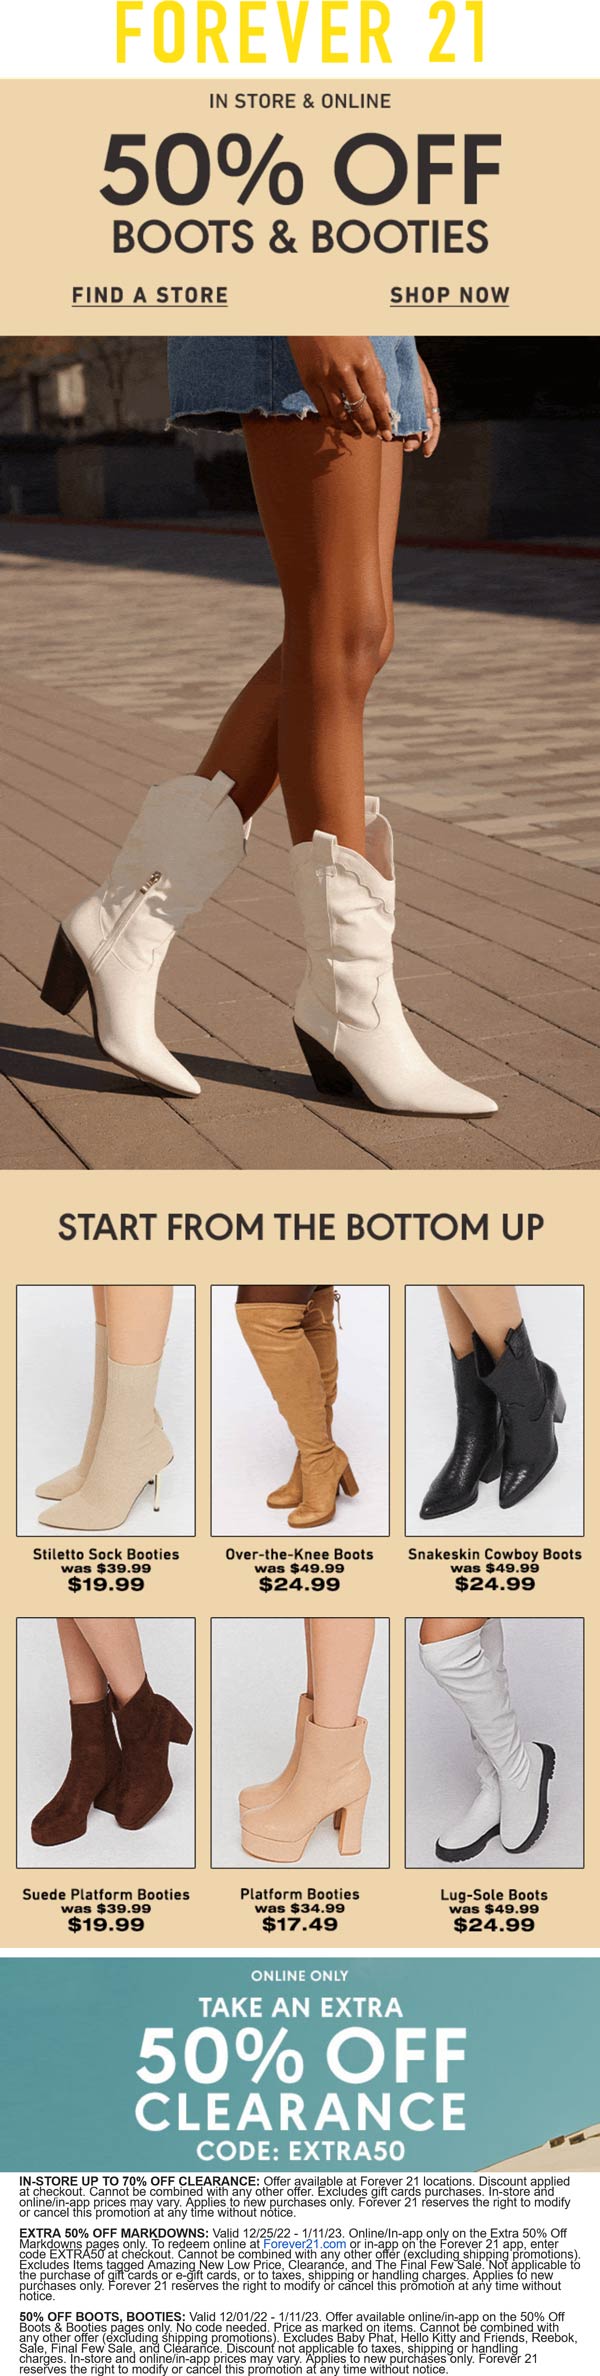 Forever 21 stores Coupon  50% off boots & more online at Forever 21 #forever21 